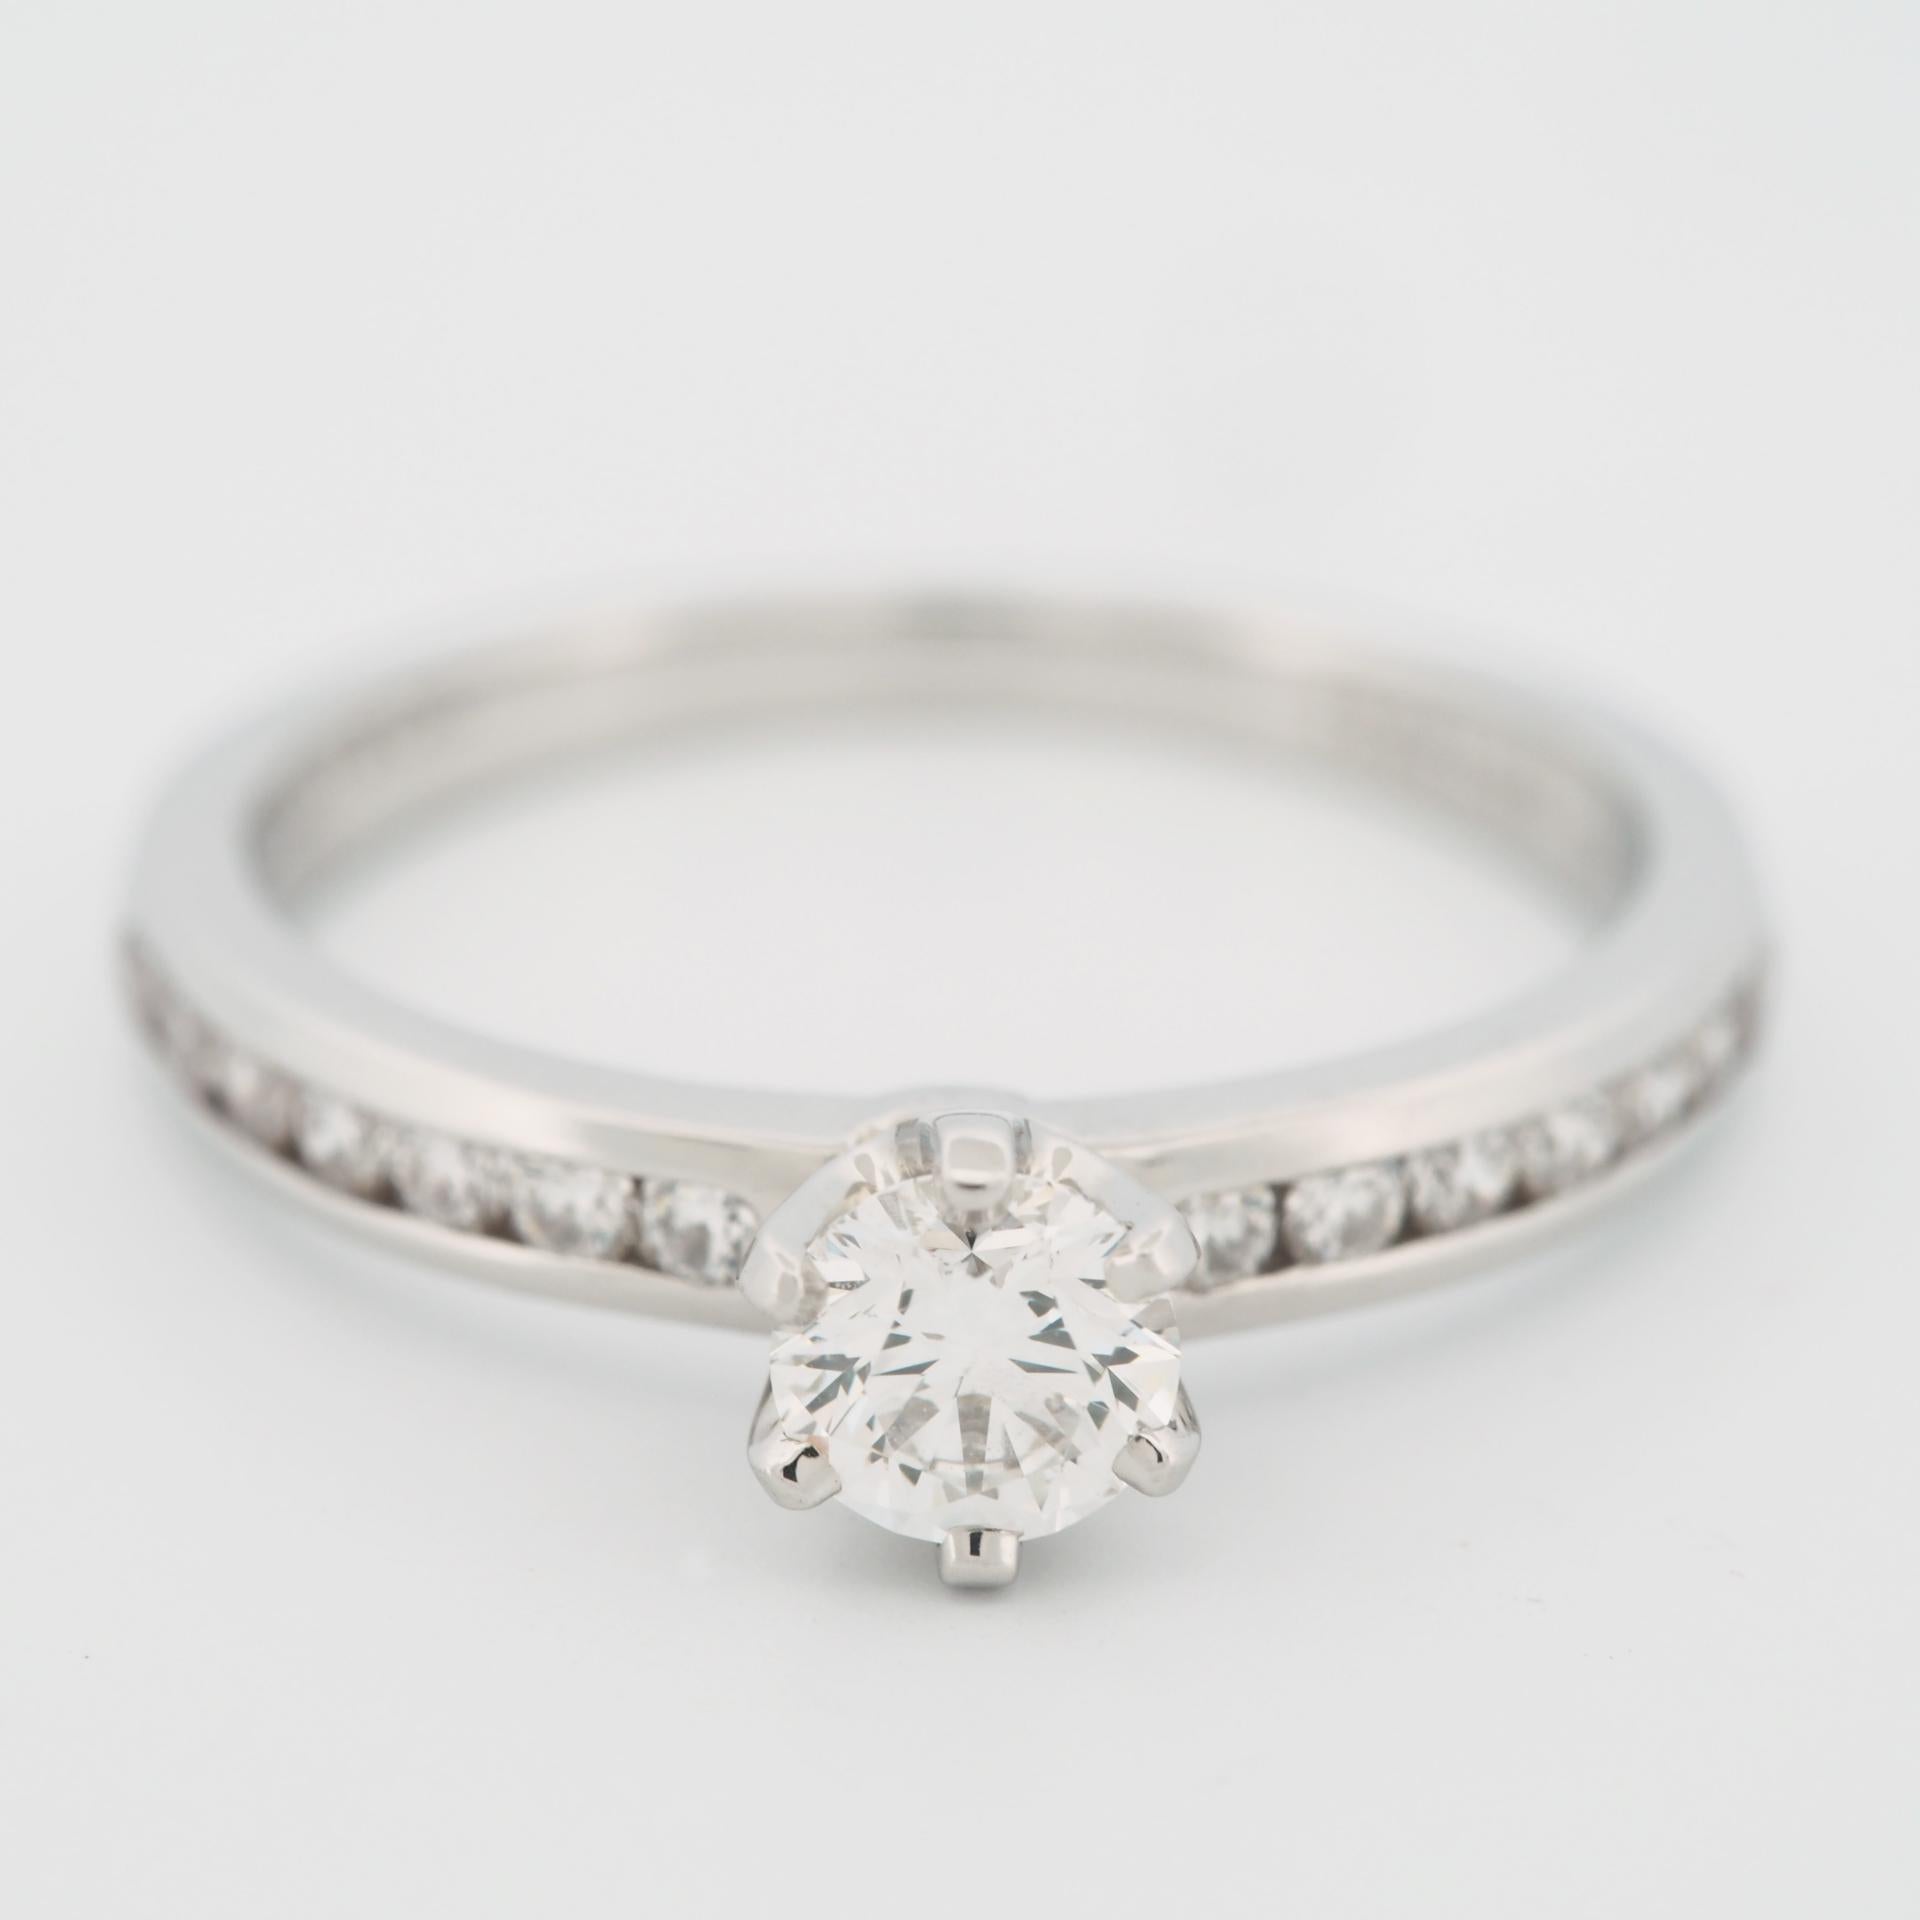 Tiffany 0.38 Carat Solitaire Diamond Ring PT950 with Channel Set Diamonds In Good Condition For Sale In Kobe, Hyogo